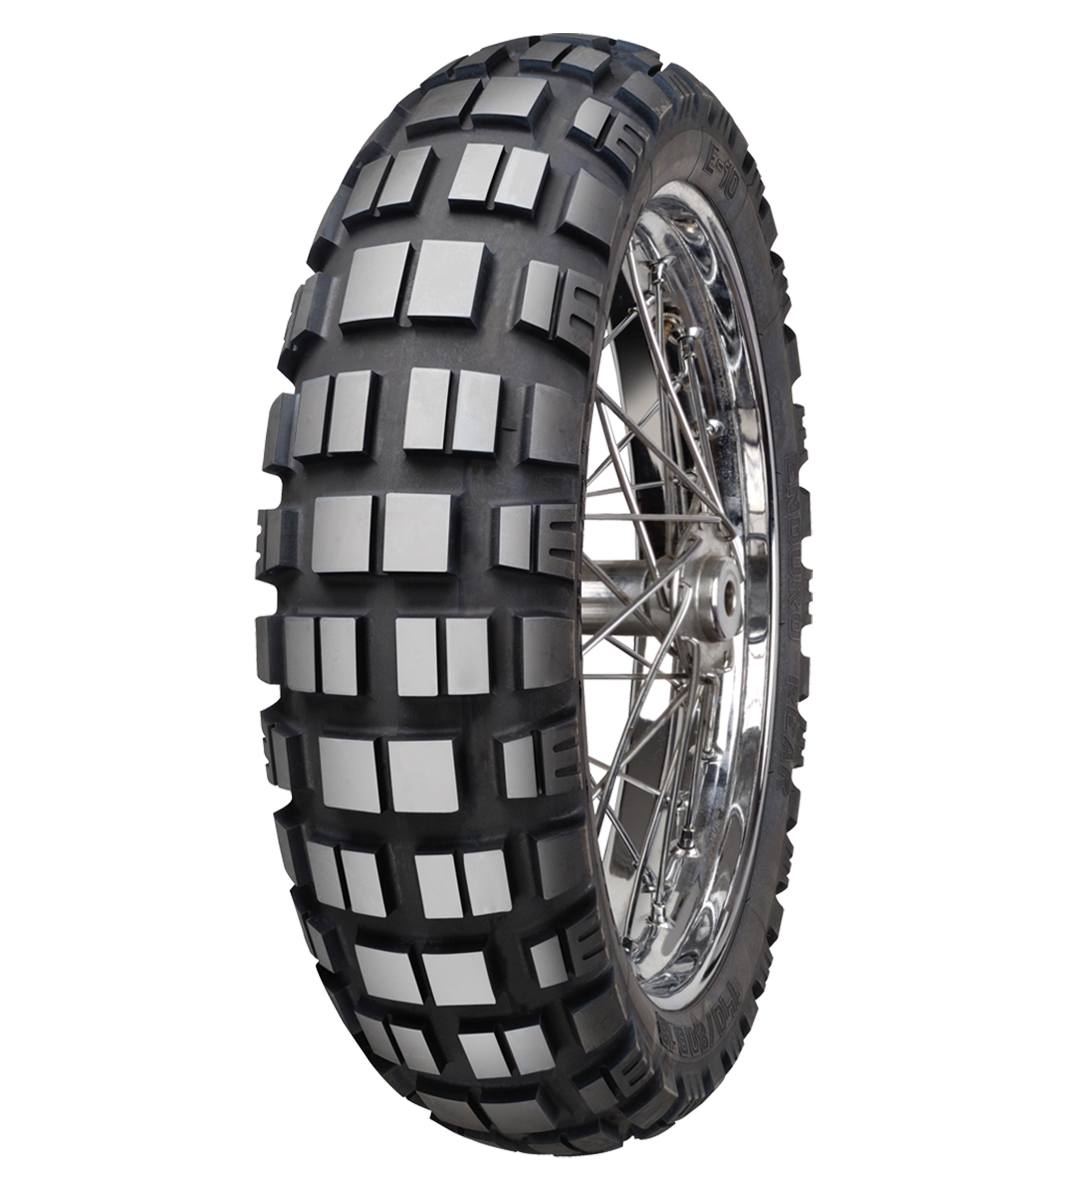 Mitas E-10 ENDURO 170/60B17 Trail OFF Trail 72Q No Stripe Tubeless Rear Tire, 224033, 170/60B17, Adventure Touring, E Series, E-10 Enduro, Rear, Trail, Trail OFF, Tires - Imported and distributed in North &amp; South America by Lindeco Genuine Powersports - Premier Powersports Equipment and Accessories for Motorcycle Enthusiasts, Professional Riders and Dealers.